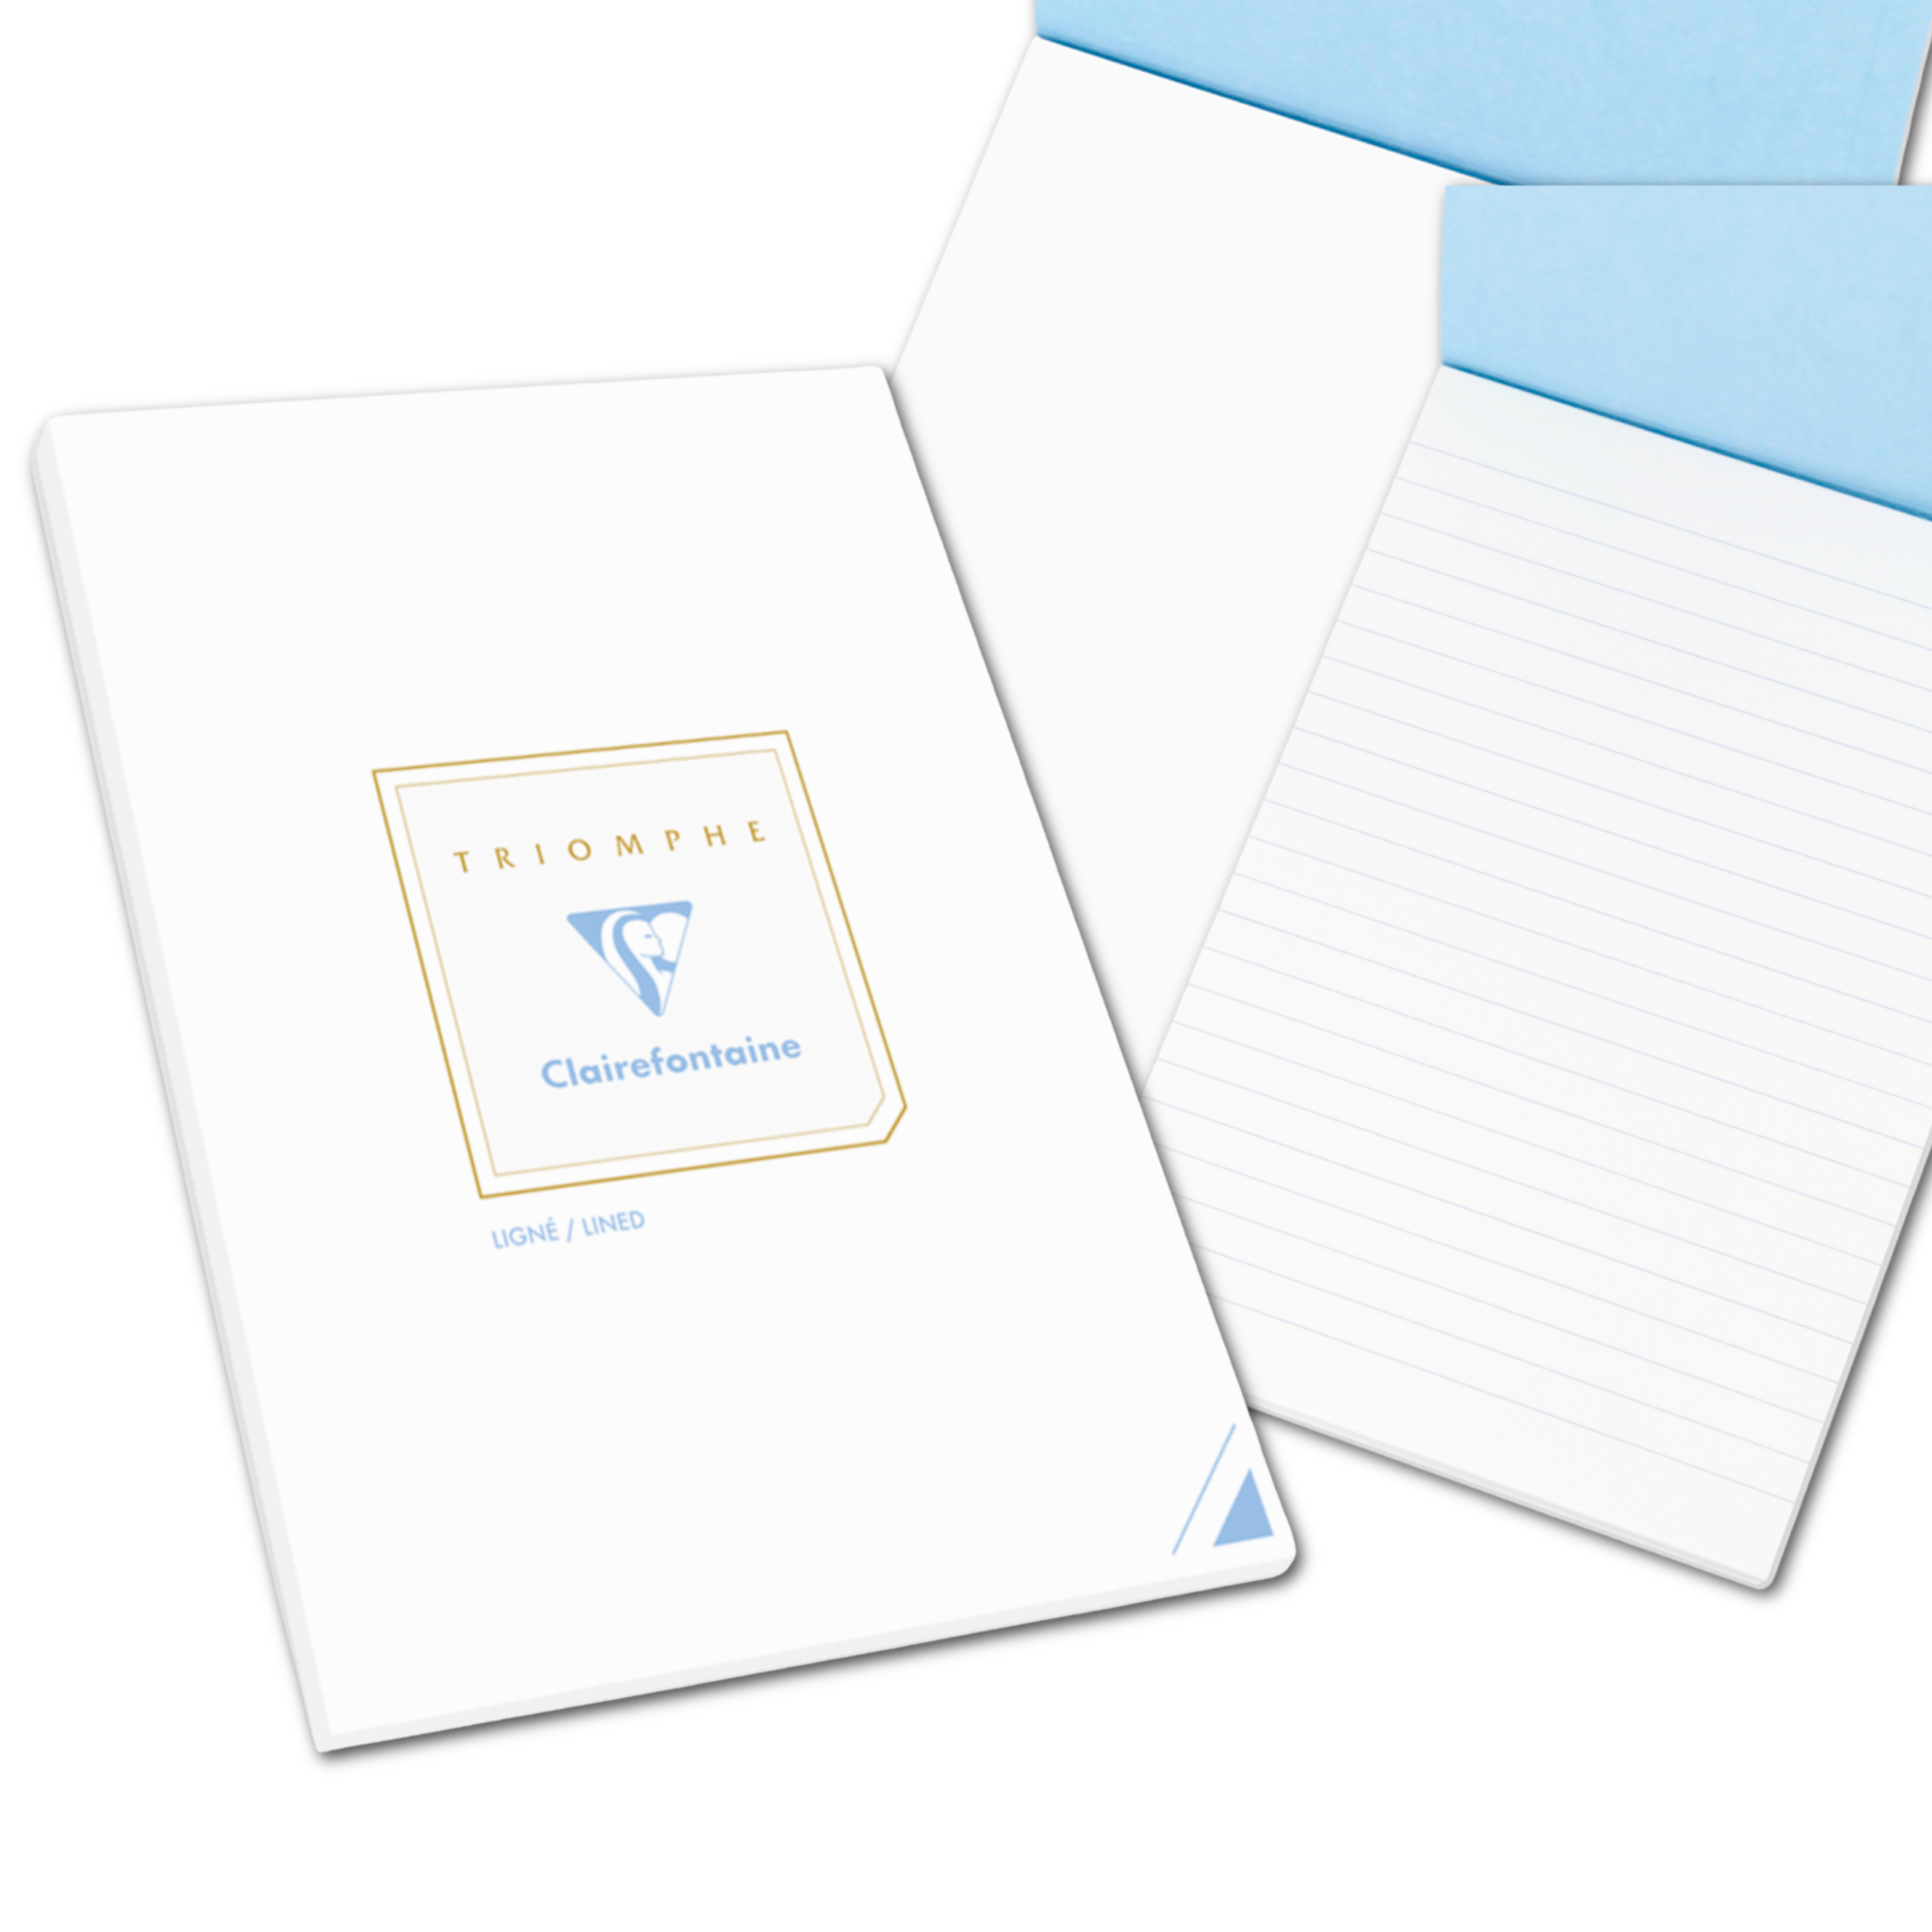 Clairefontaine Triomphe Stationery Tablets - Pk of 10